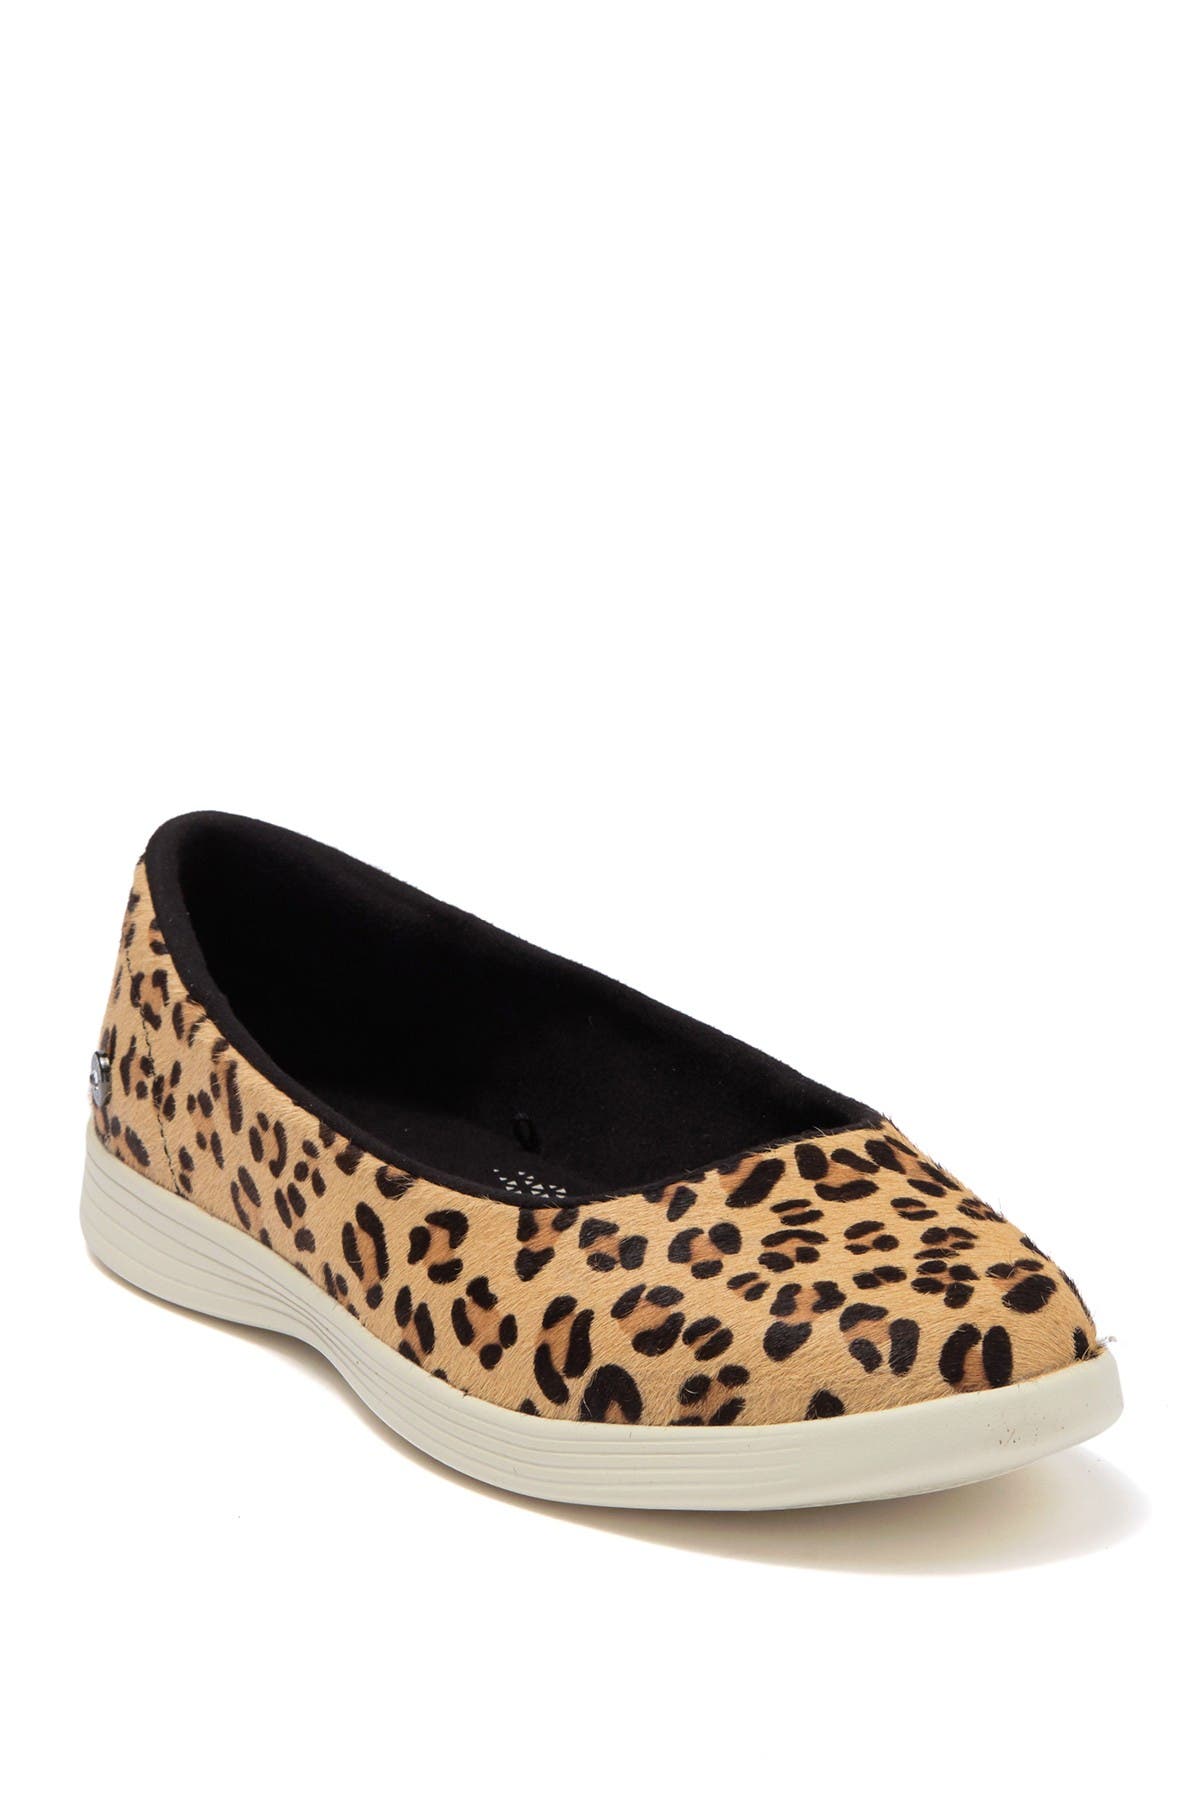 Flats for Women Clearance | Nordstrom Rack